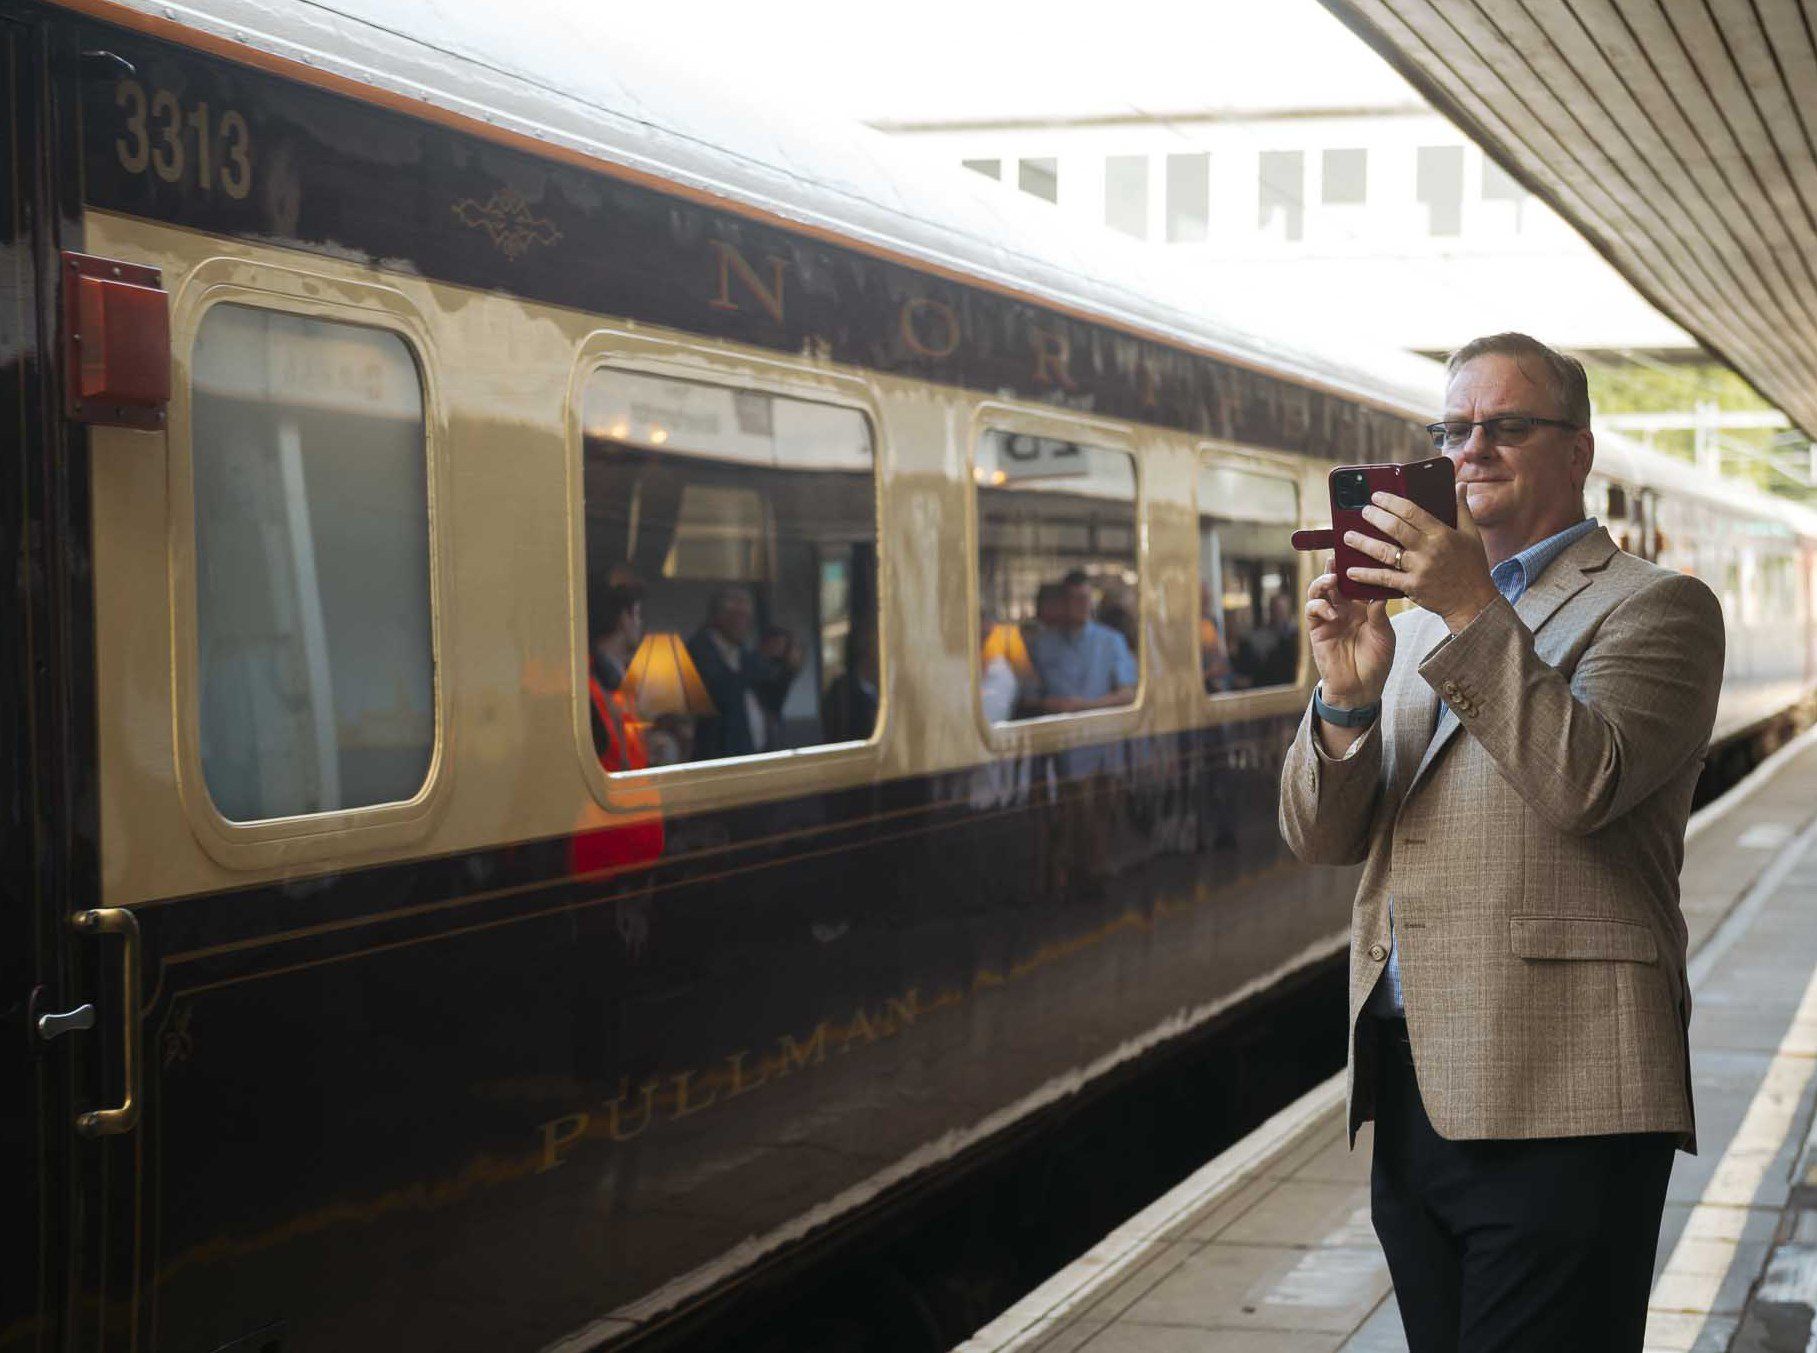 Watch: All aboard! Excitement as Britain's 'poshest train' with £700 tickets sets off from Wolverhampton